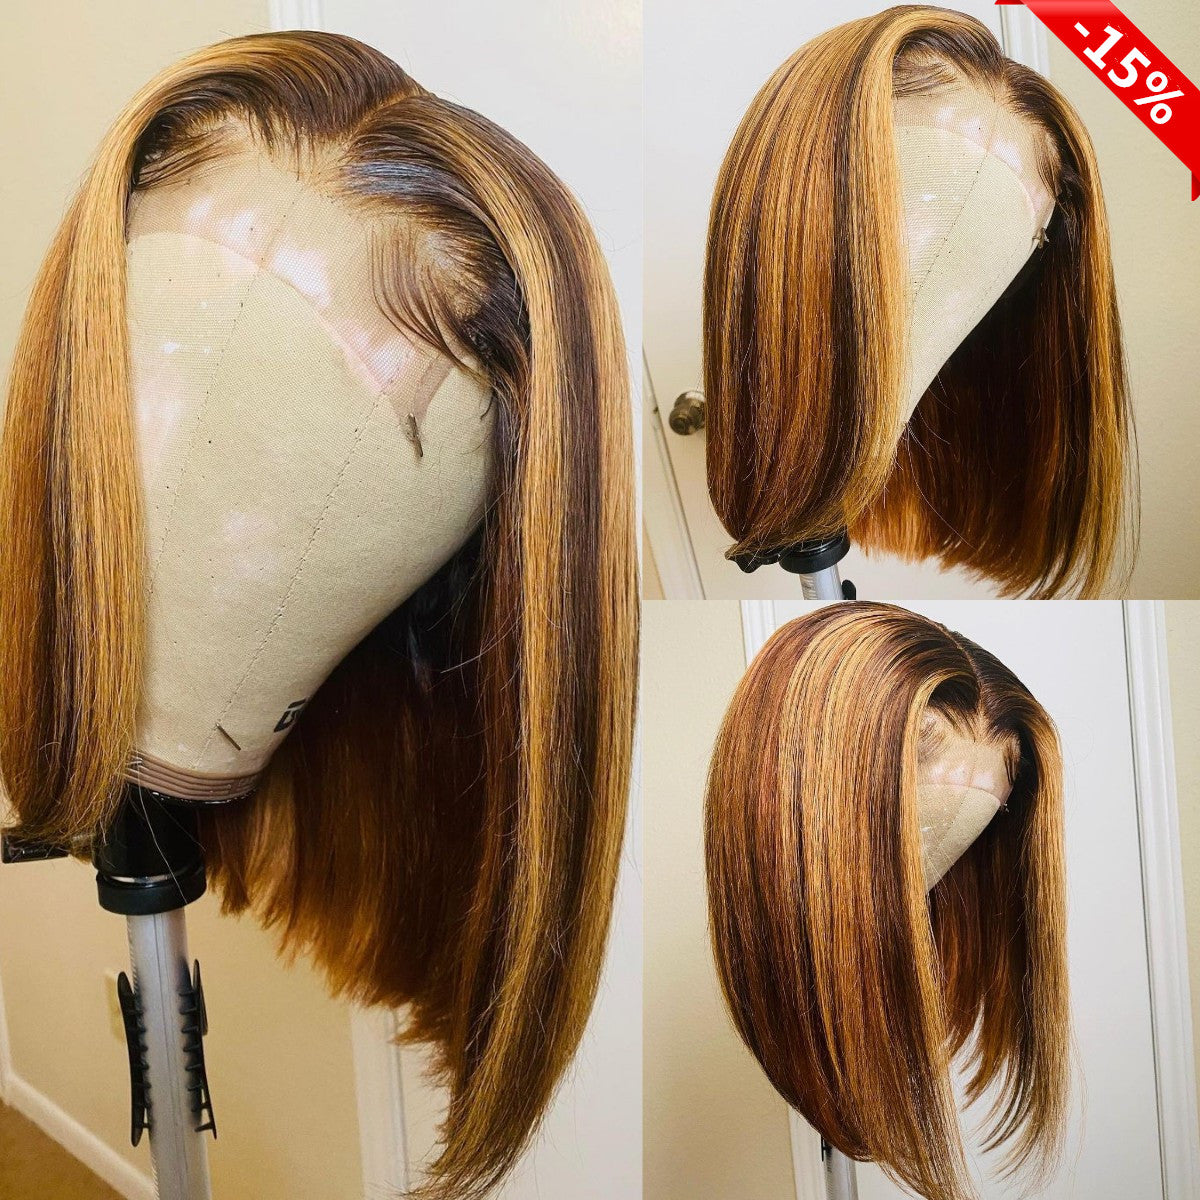 Yoniswigs 13*4 Transparent Lace Front Highlight Bob Wigs Pre Plucked Hair Human Hair 150% Density